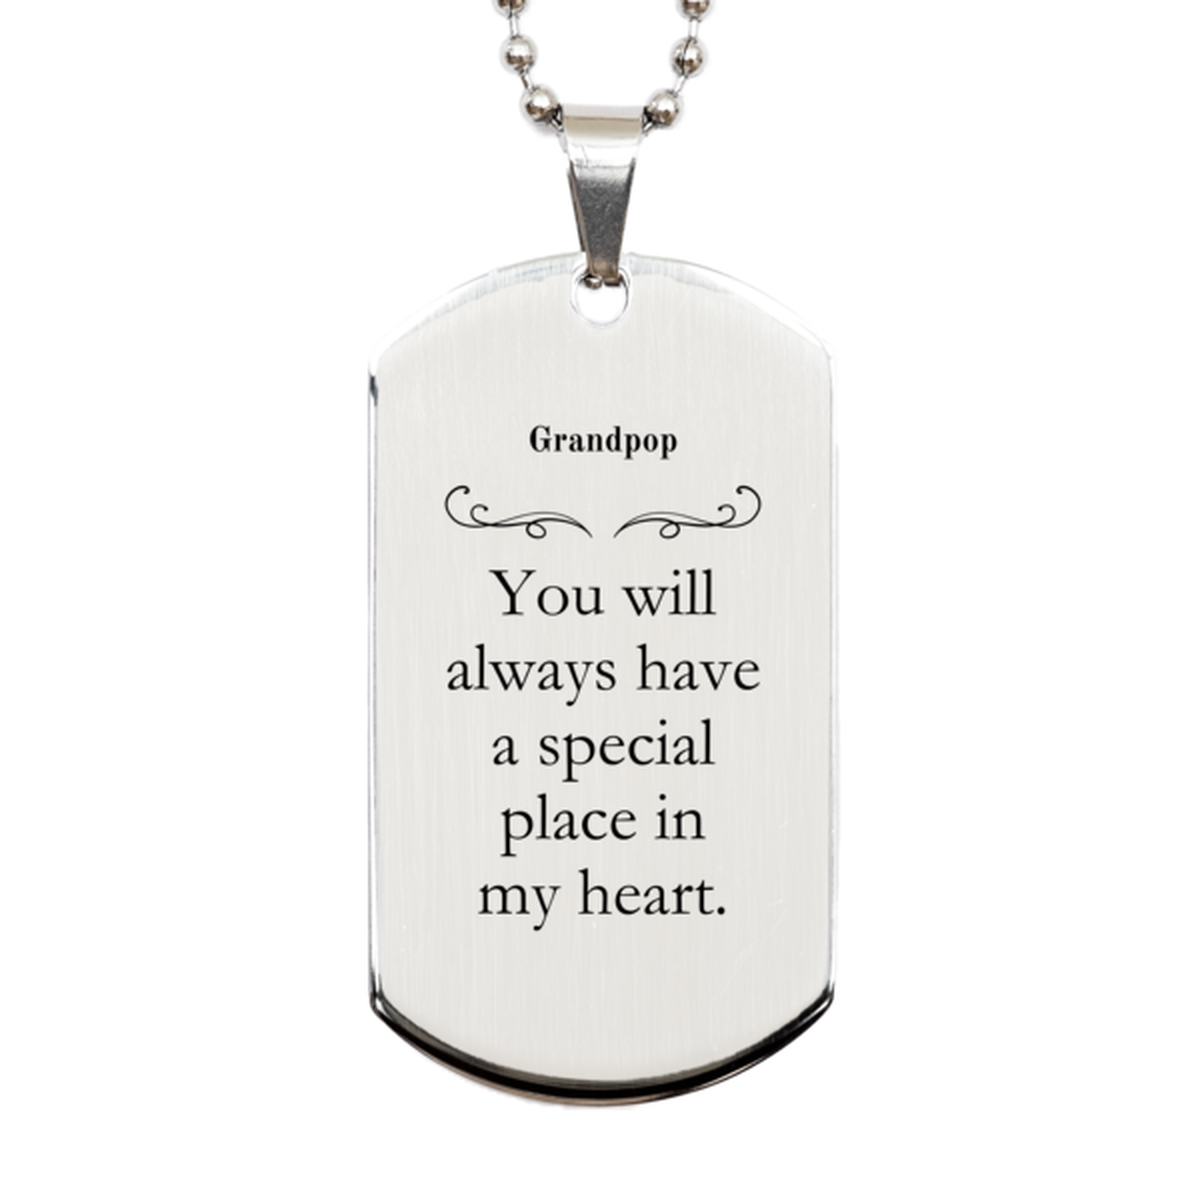 Grandpop Engraved Silver Dog Tag - Youll always have a special place in my heart - Perfect Gift for Birthday, Christmas, Veterans Day - Grandpop